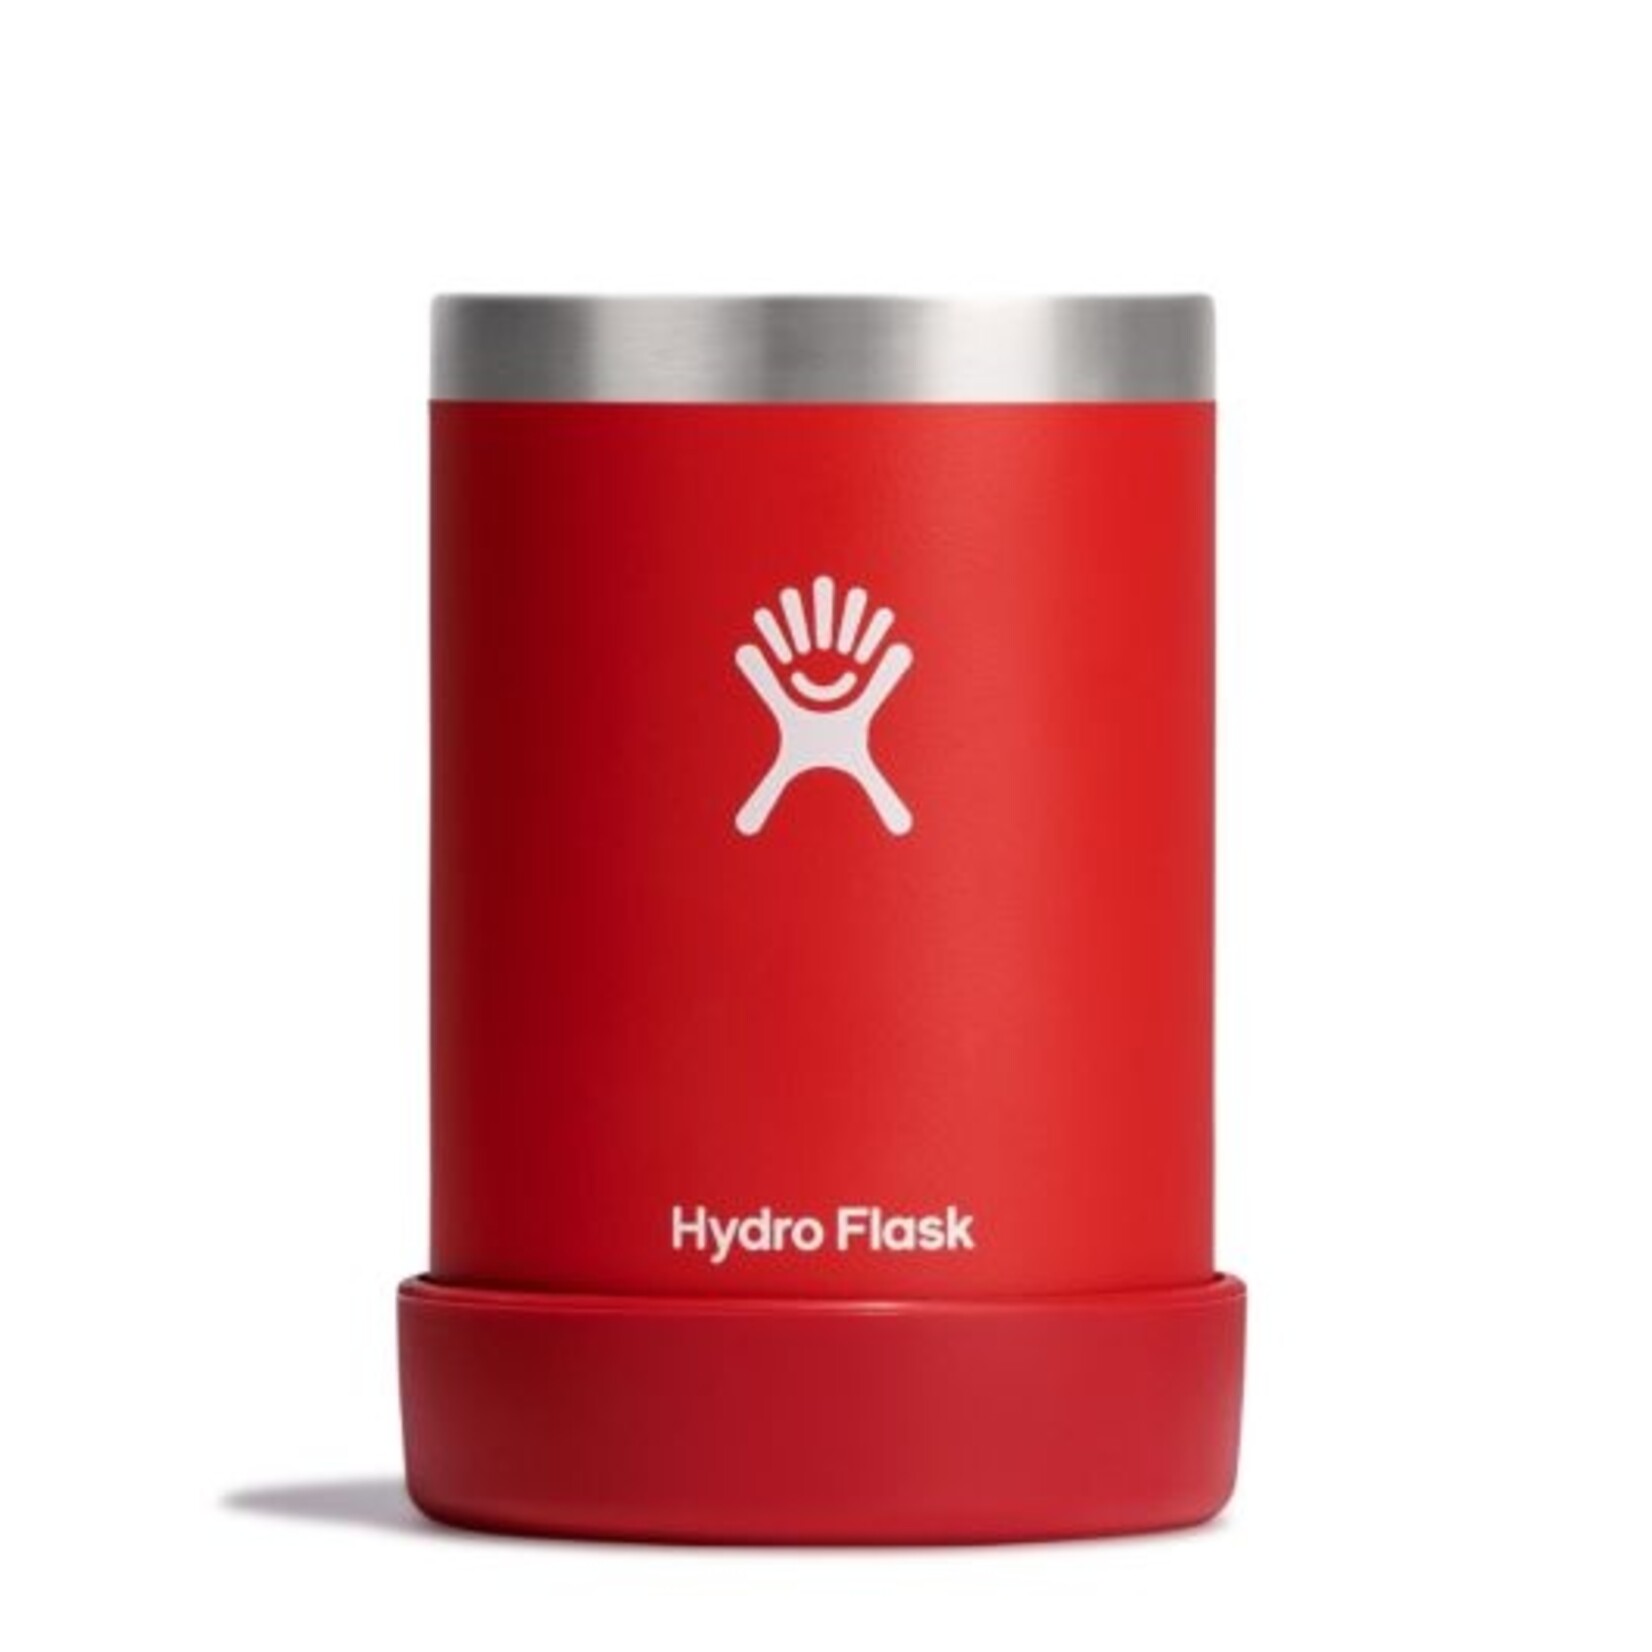 Hydro Flask 12 oz Cooler cup